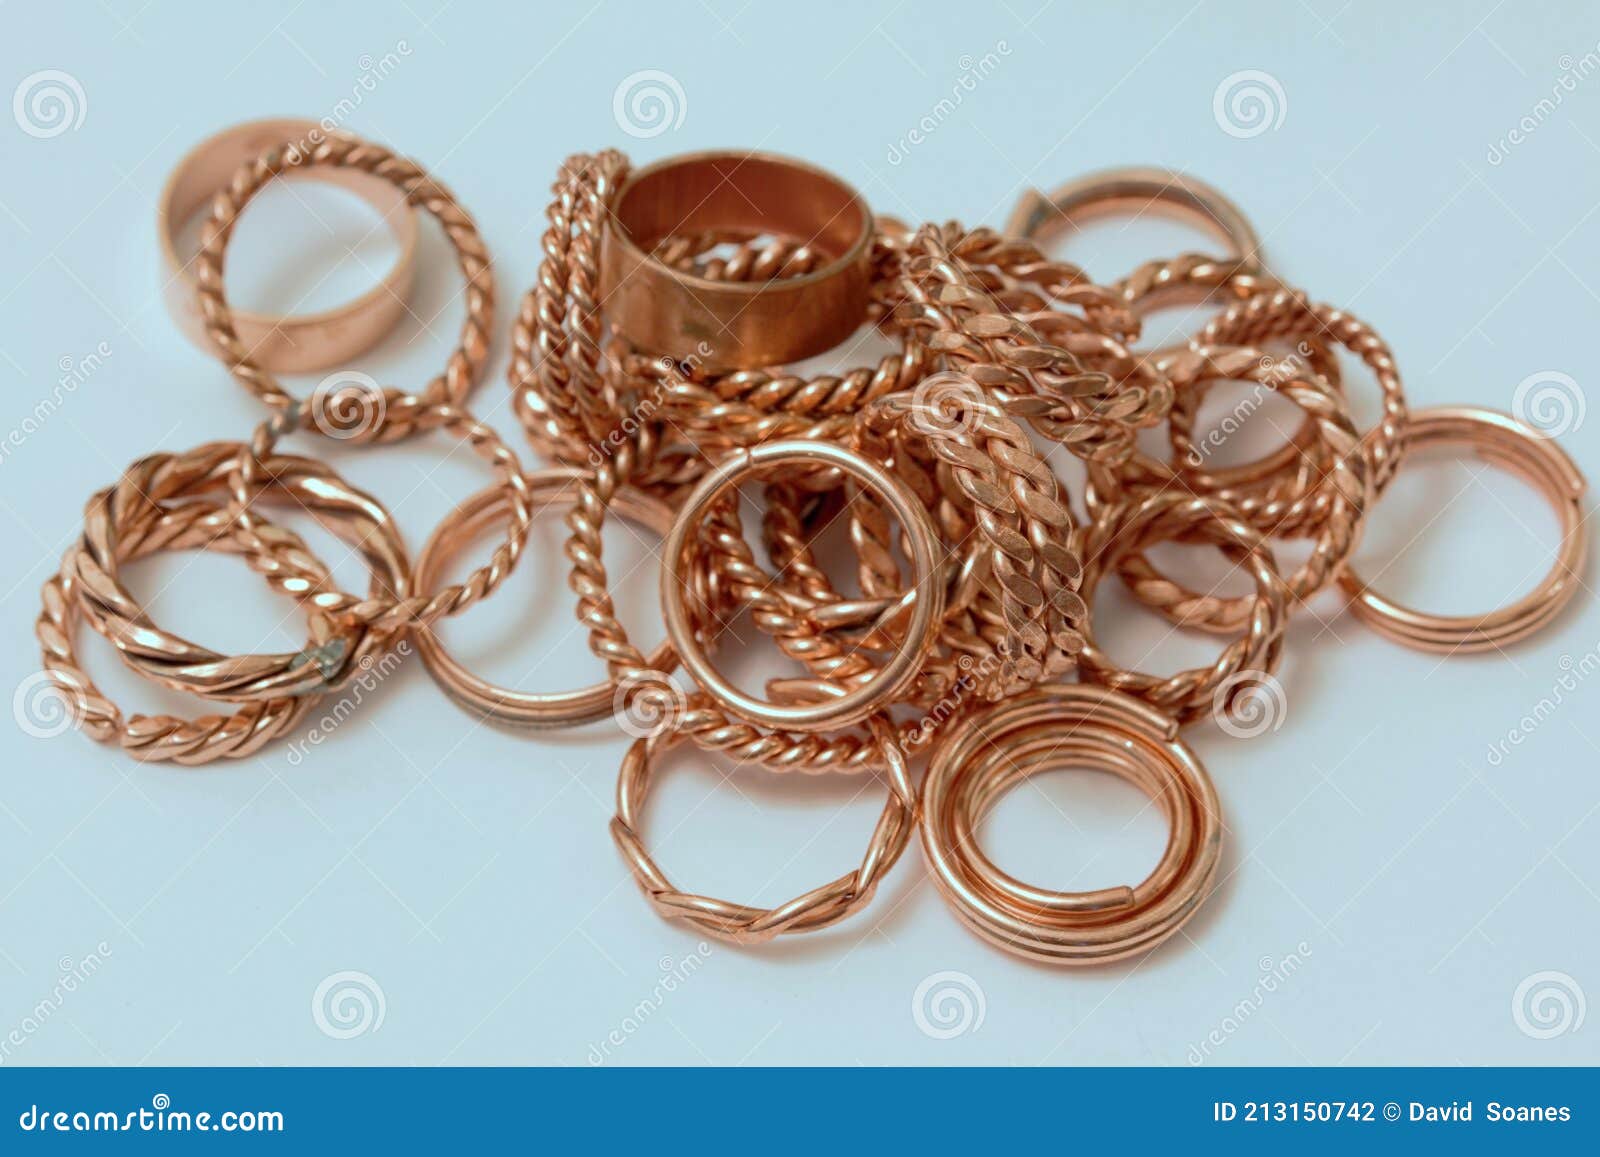 Adjustable sterling and copper ring - Kaily Jayne